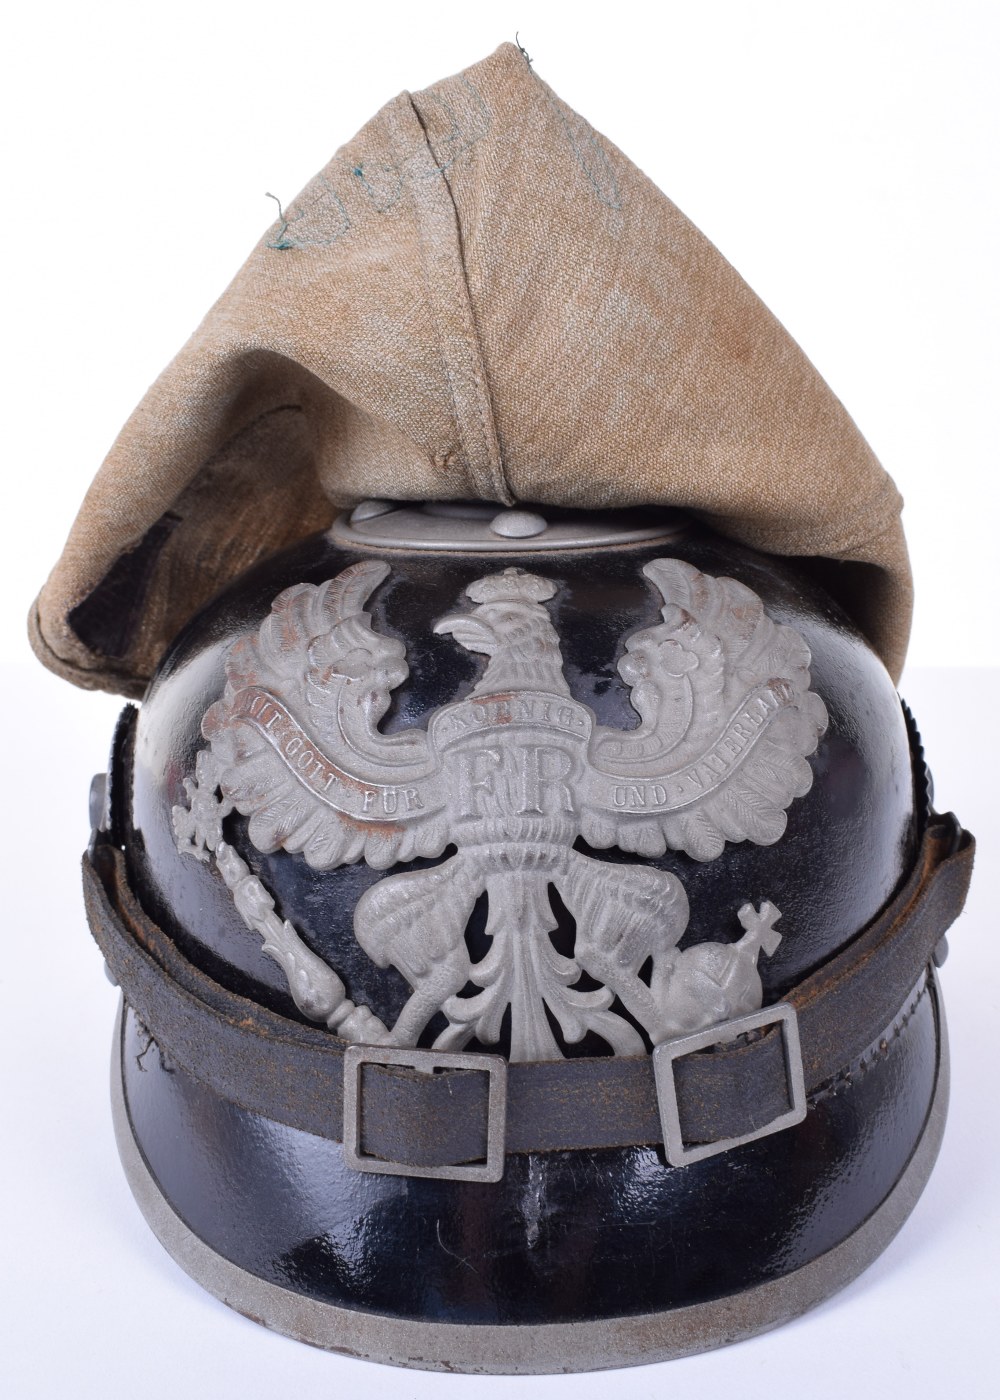 Prussian Other Ranks Pickelhaube with Original Trench Cover - Image 7 of 19